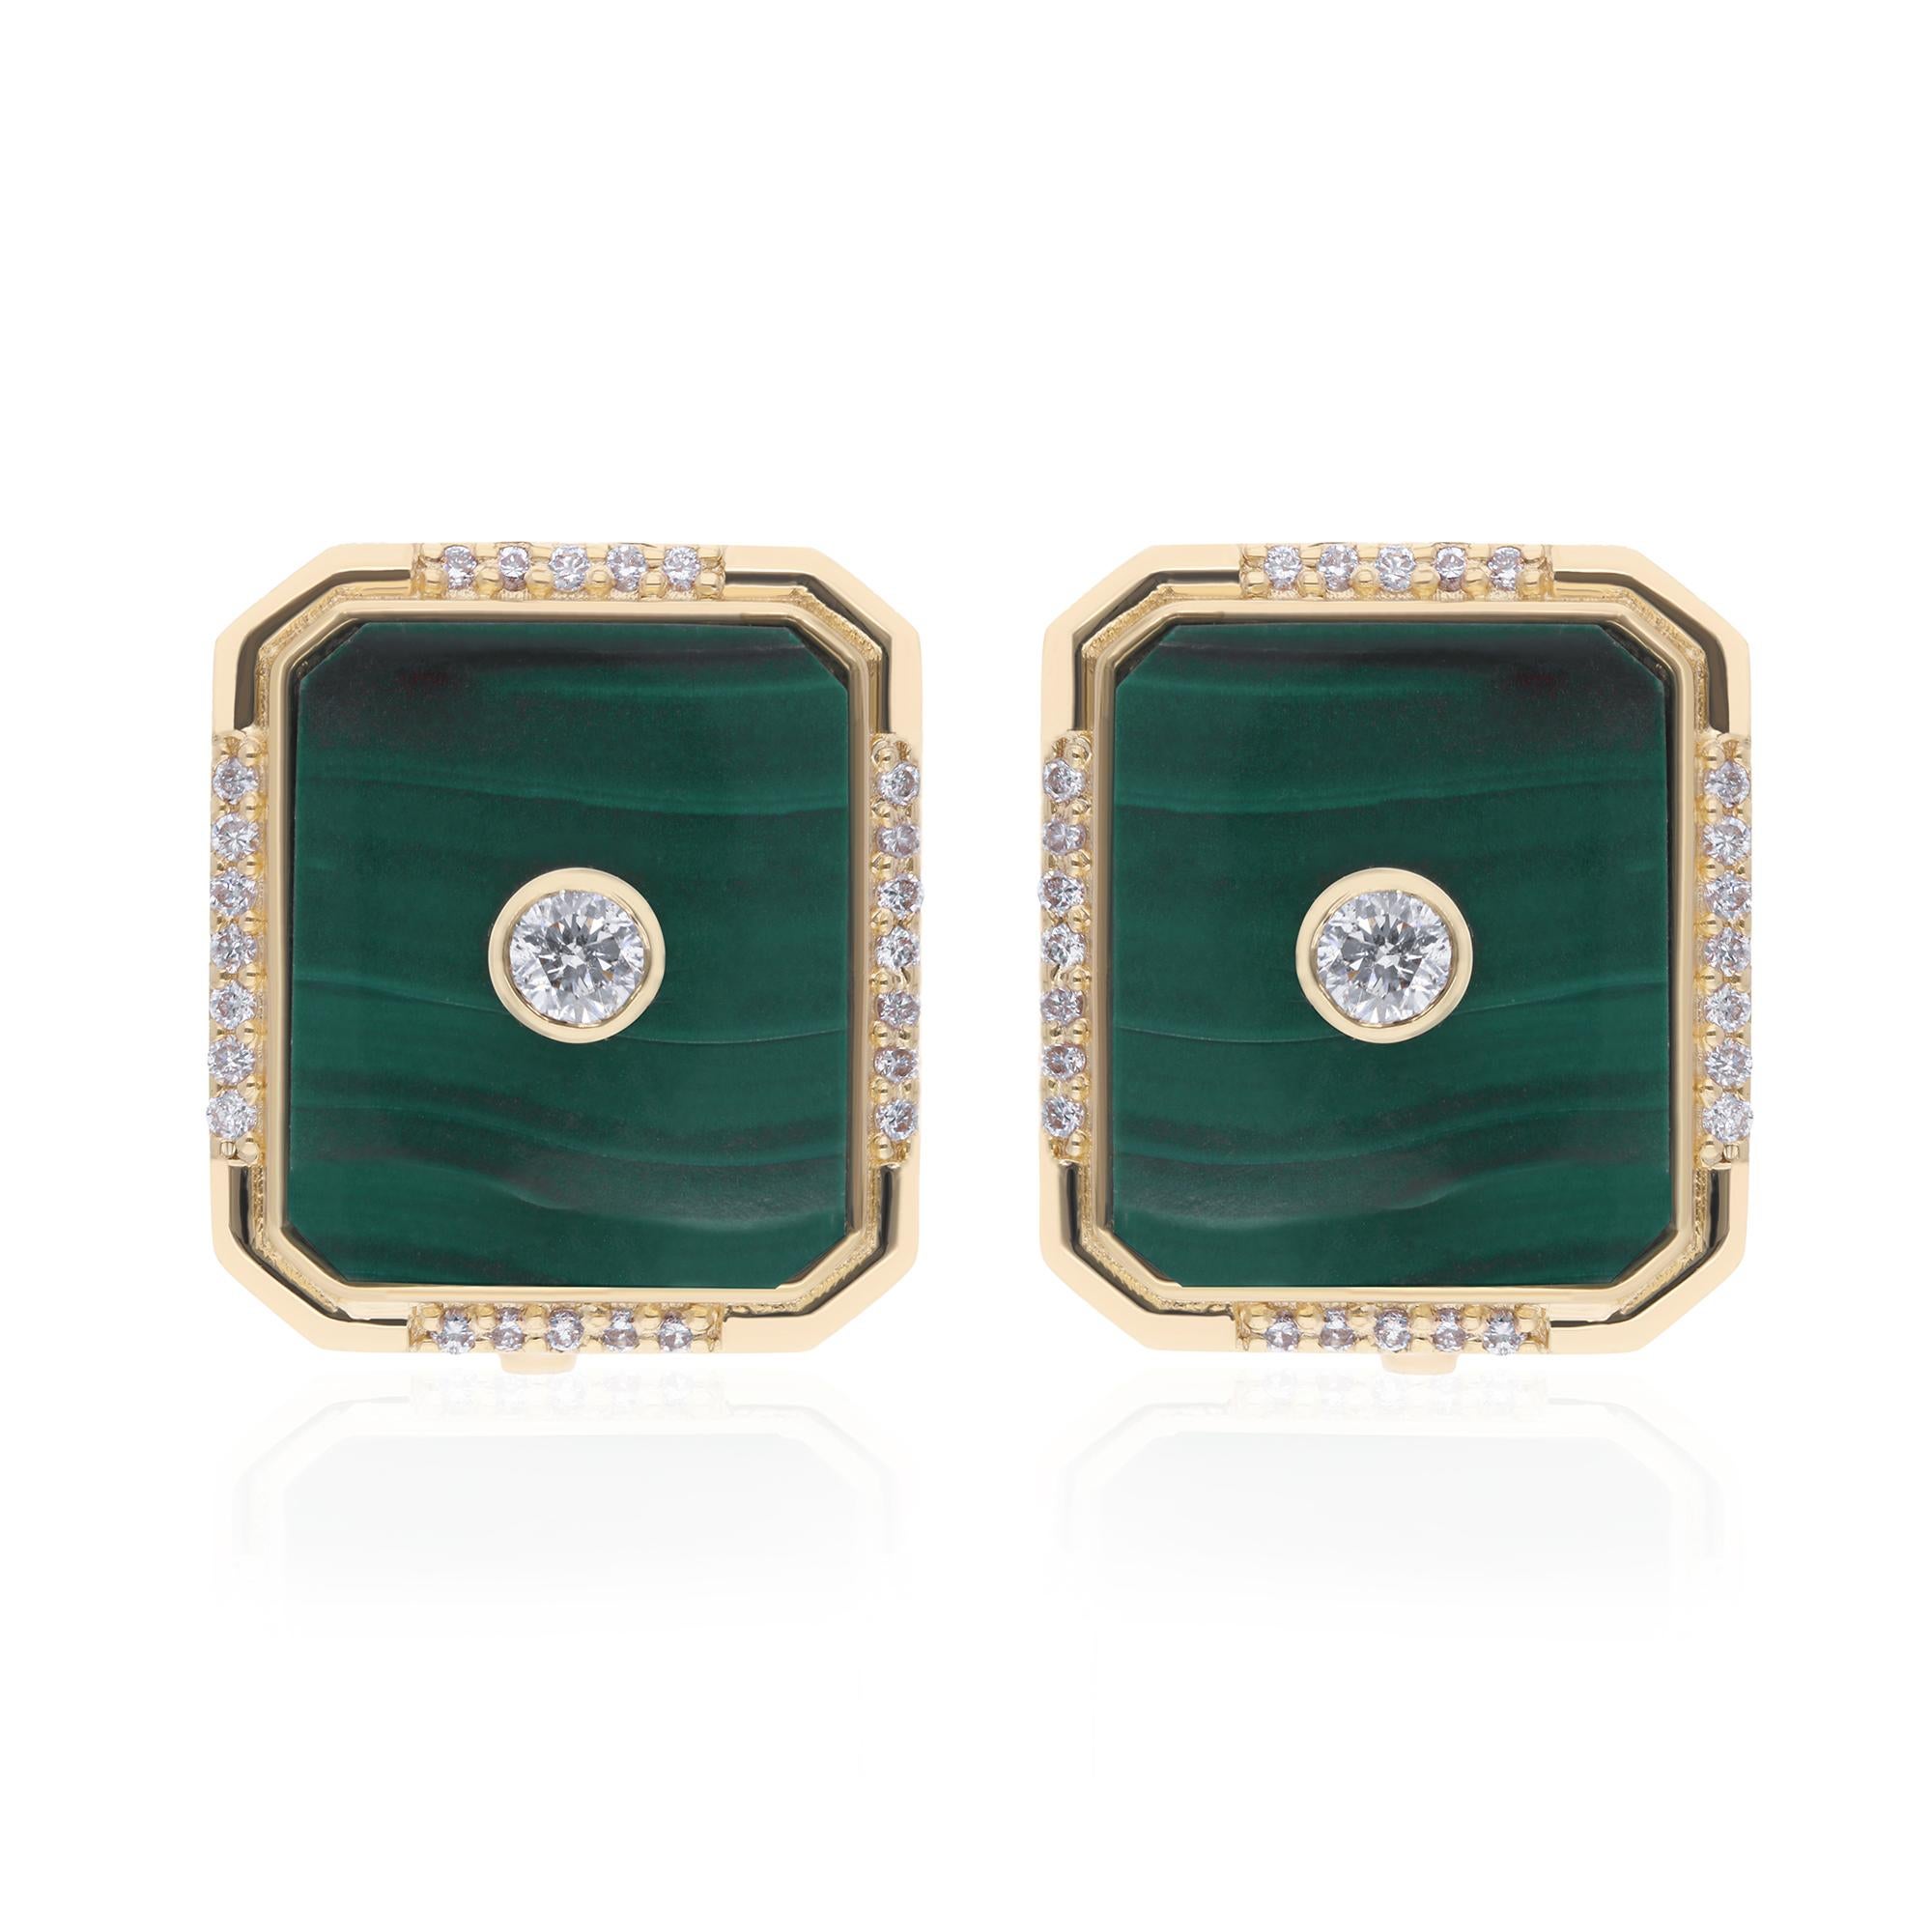 Each earring showcases a captivating malachite gemstone, renowned for its striking green hues and mesmerizing patterns, evoking the lush beauty of nature. Set in luxurious 14 karat yellow gold, the warm tones of the metal perfectly complement the